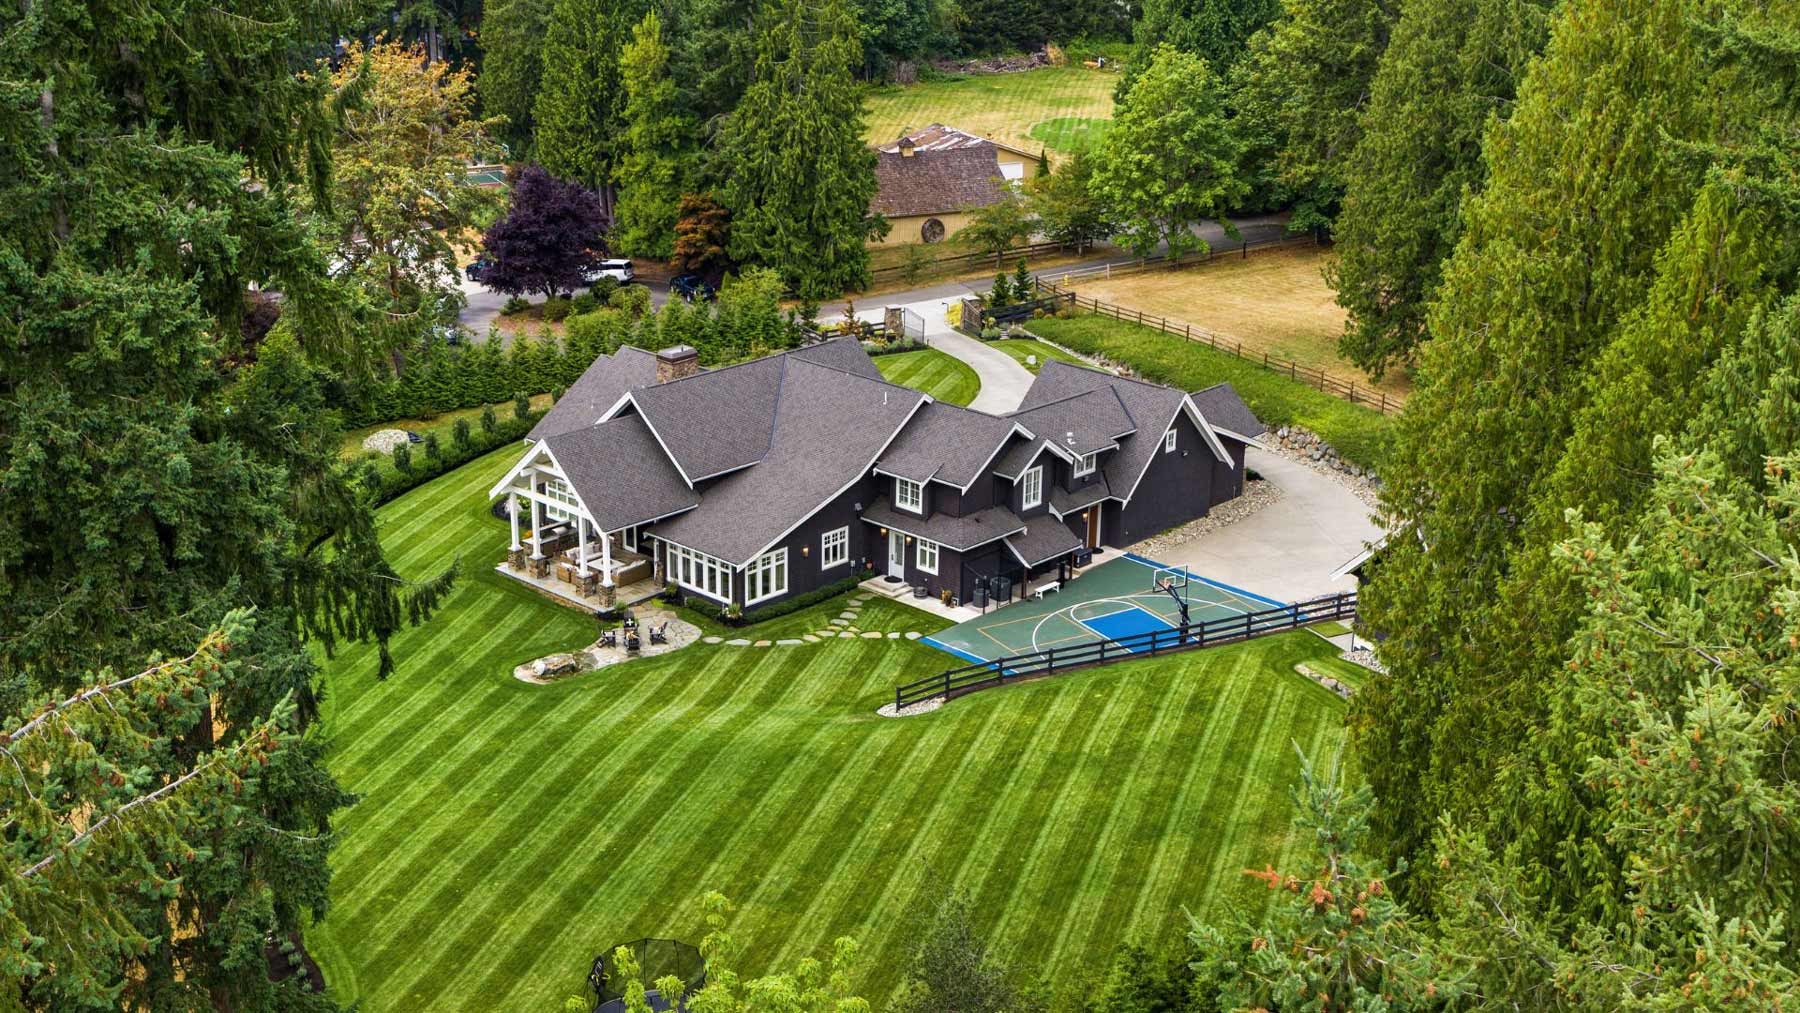 Woodinville Luxury estate arial drone photo of huge green grass and luxury home with text saying WOODINVILLE